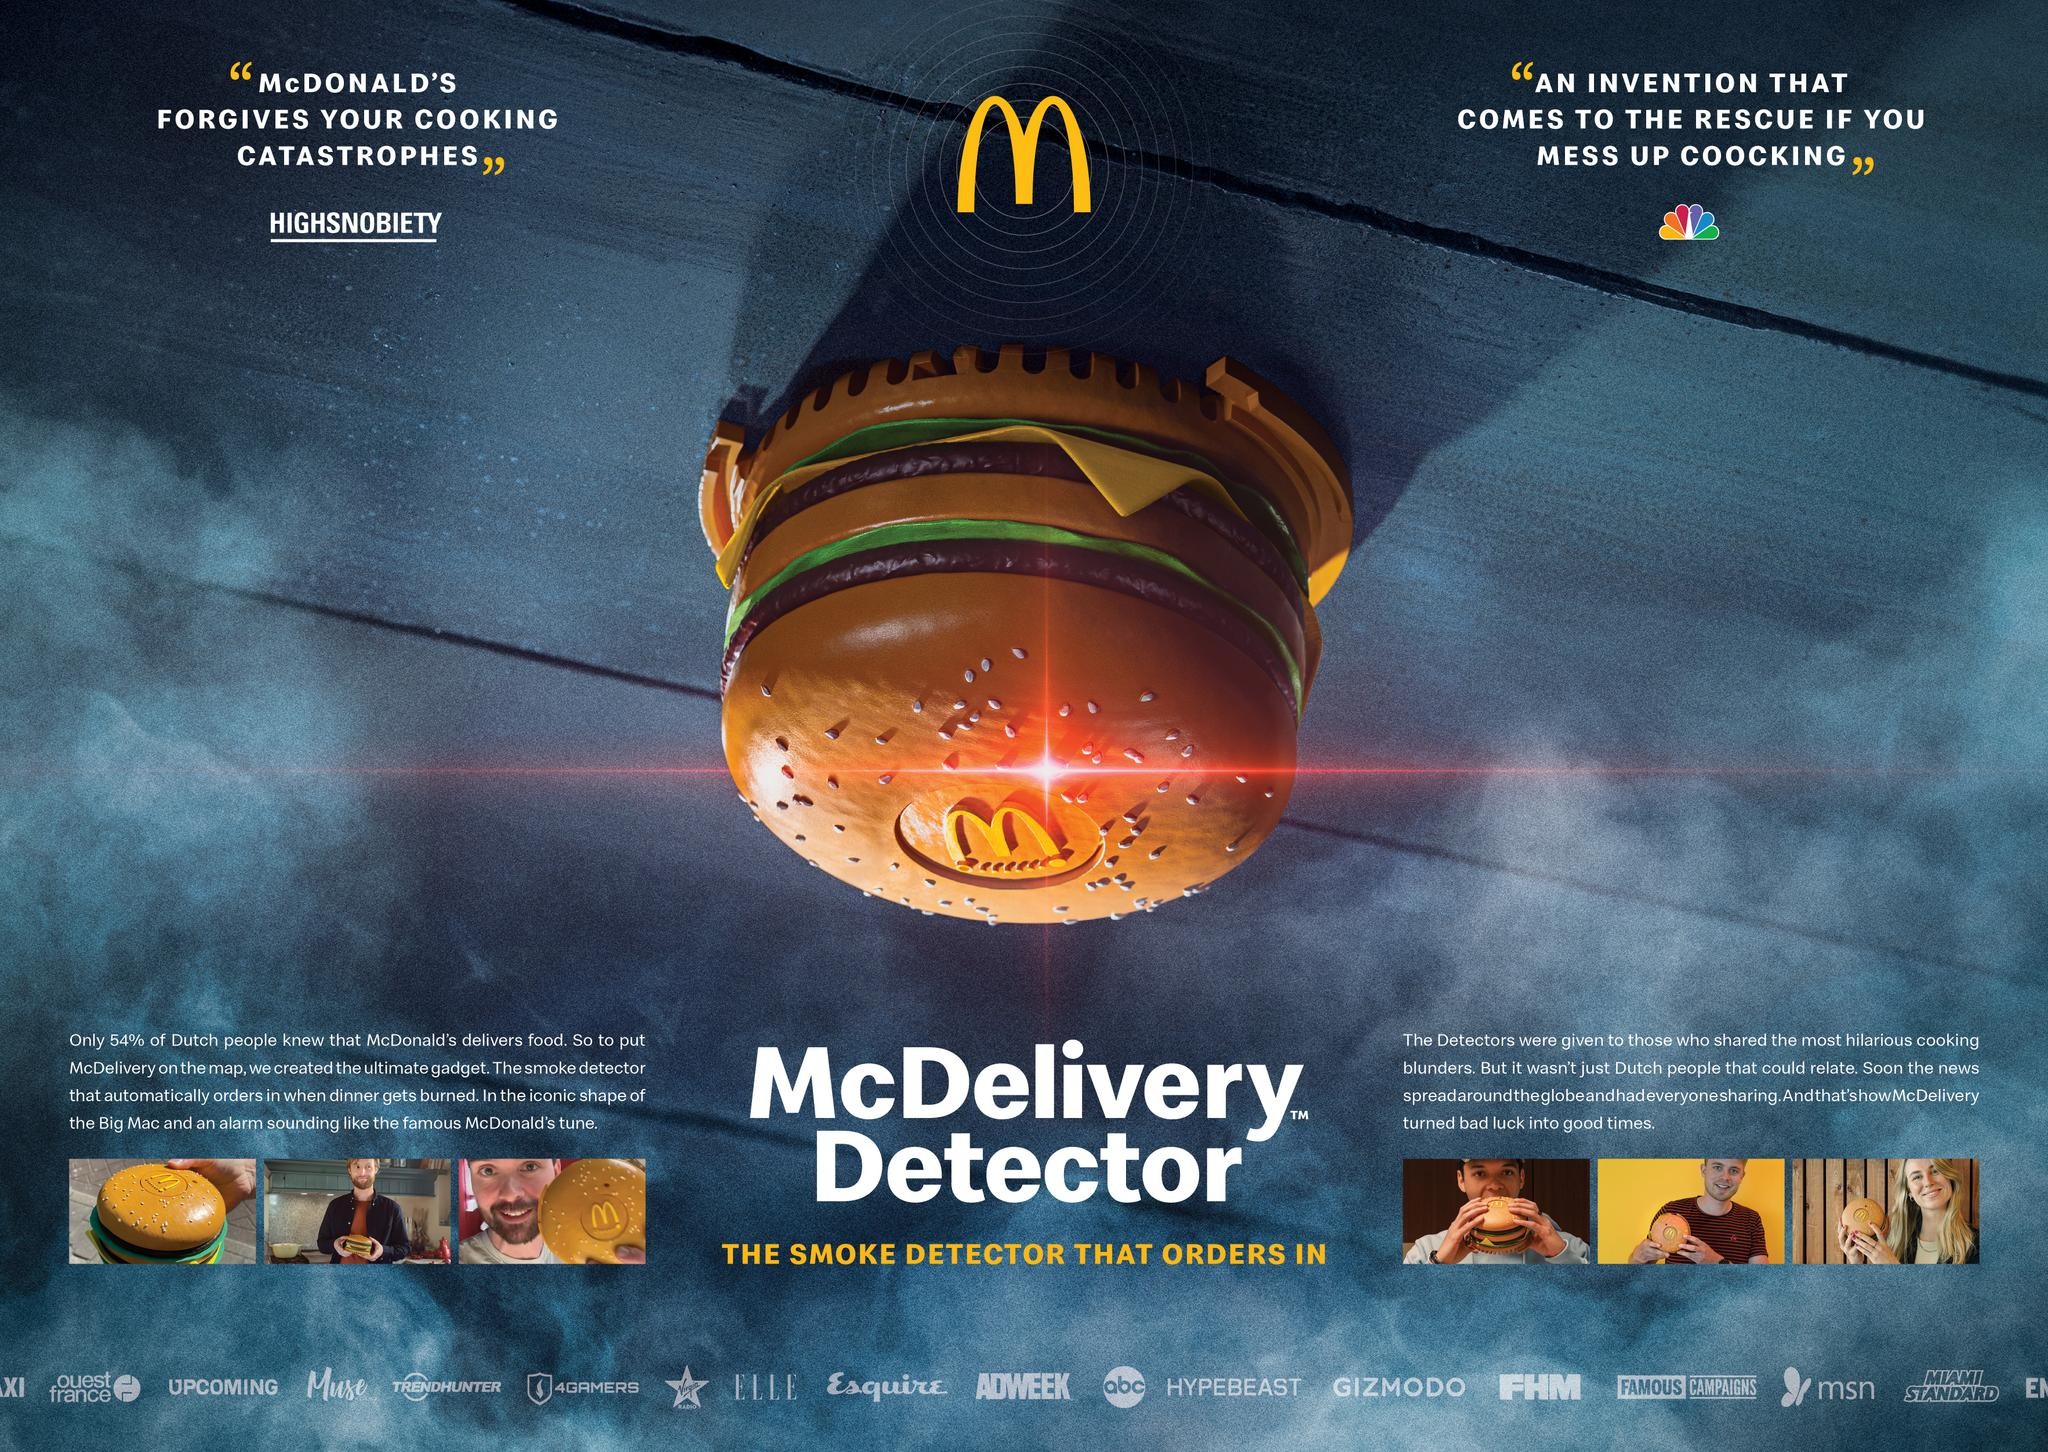 McDonald's McDelivery Detector